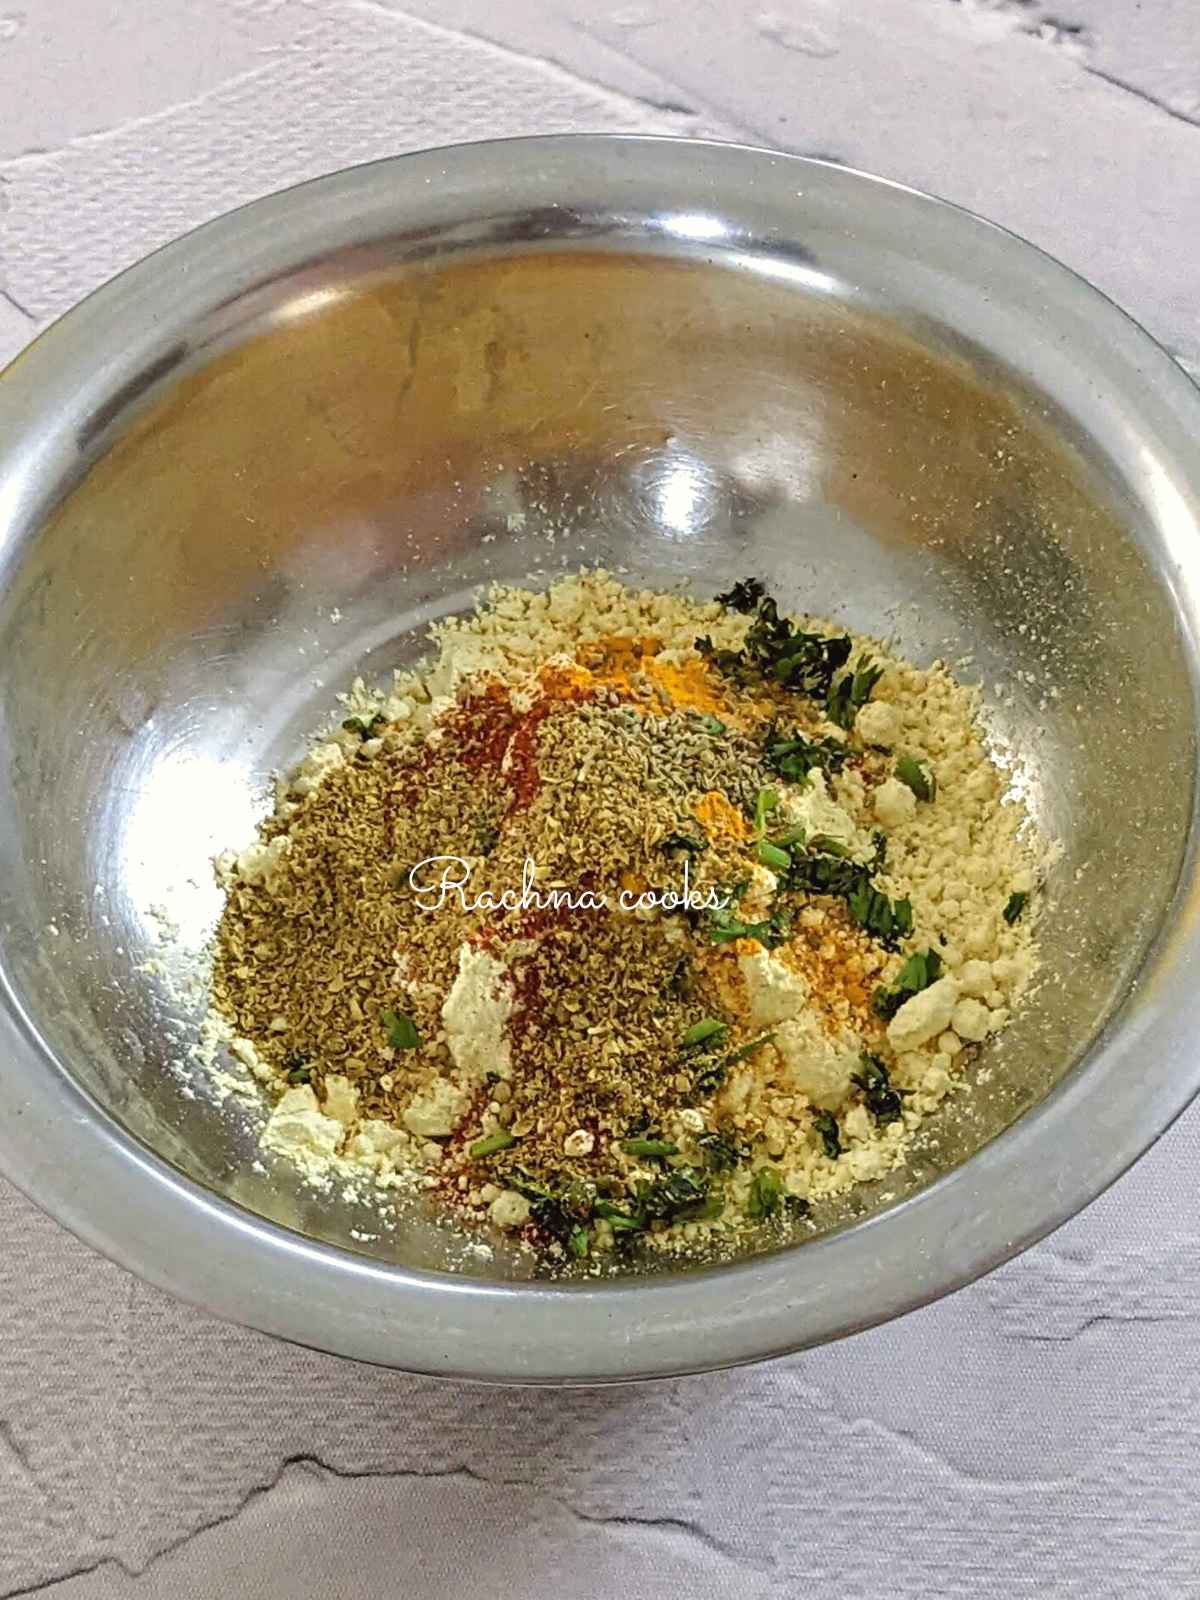 Chickpea flour with spices, salt and coriander leaves.